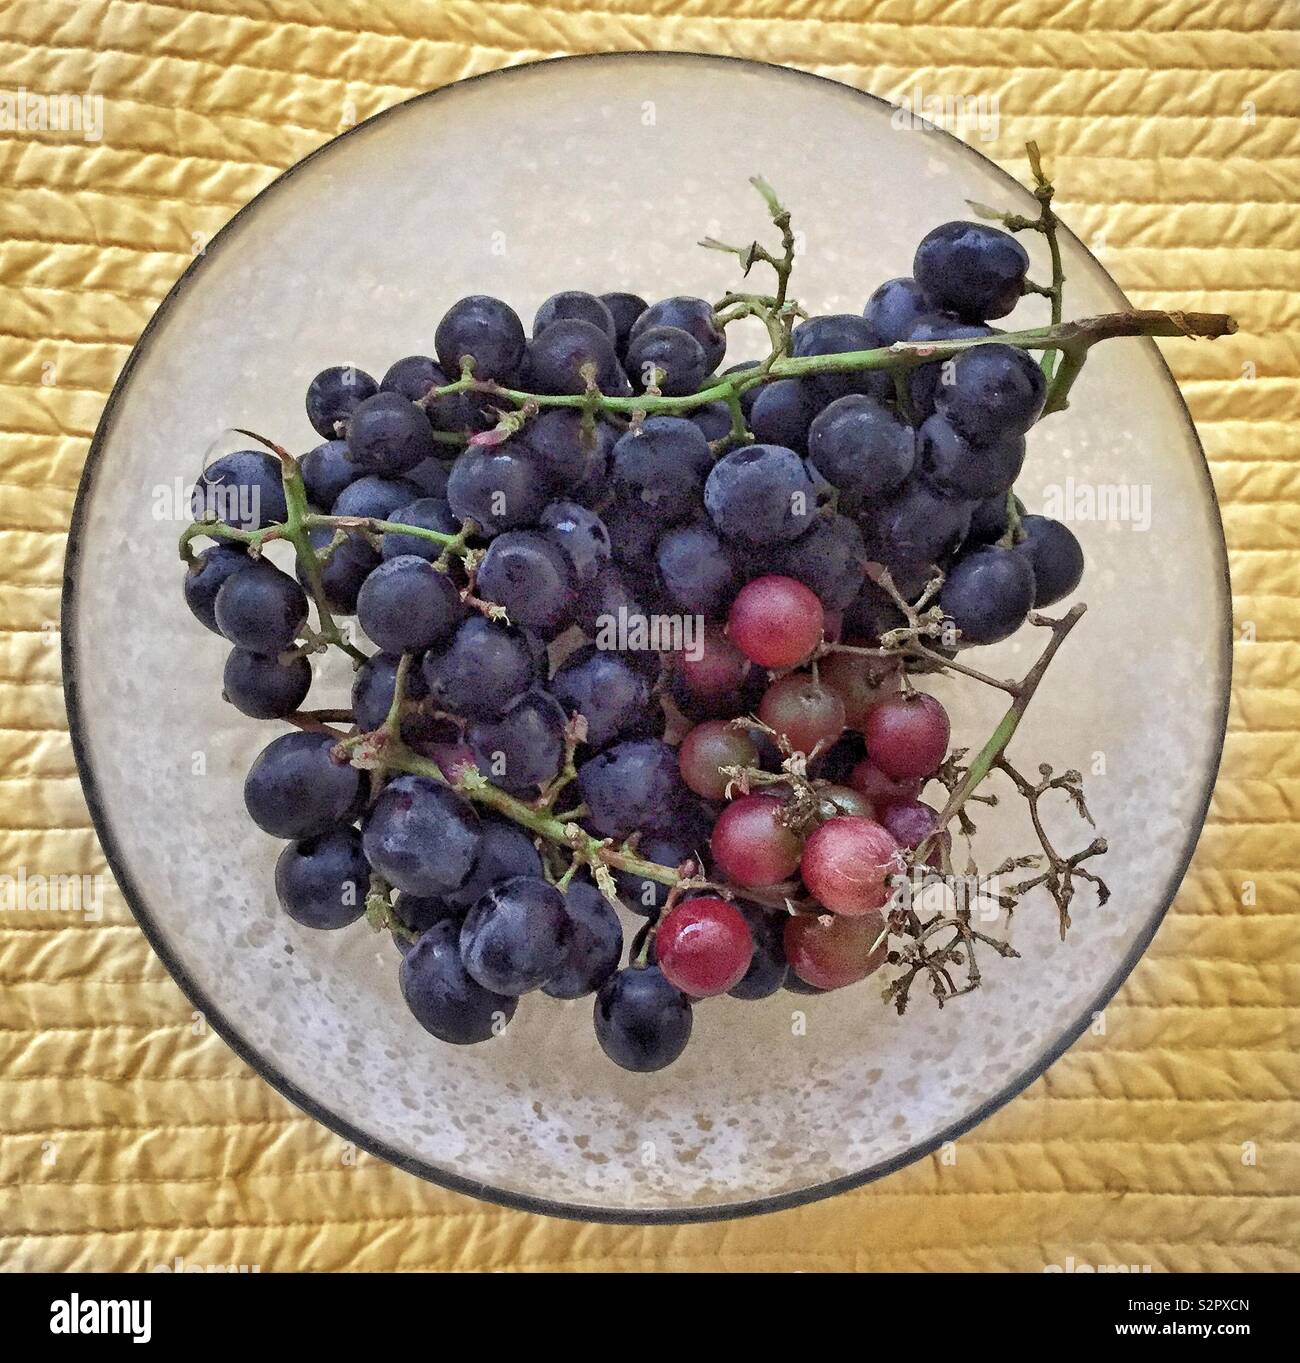 A bowl of black and red grapes on a yellow tablecloth Stock Photo